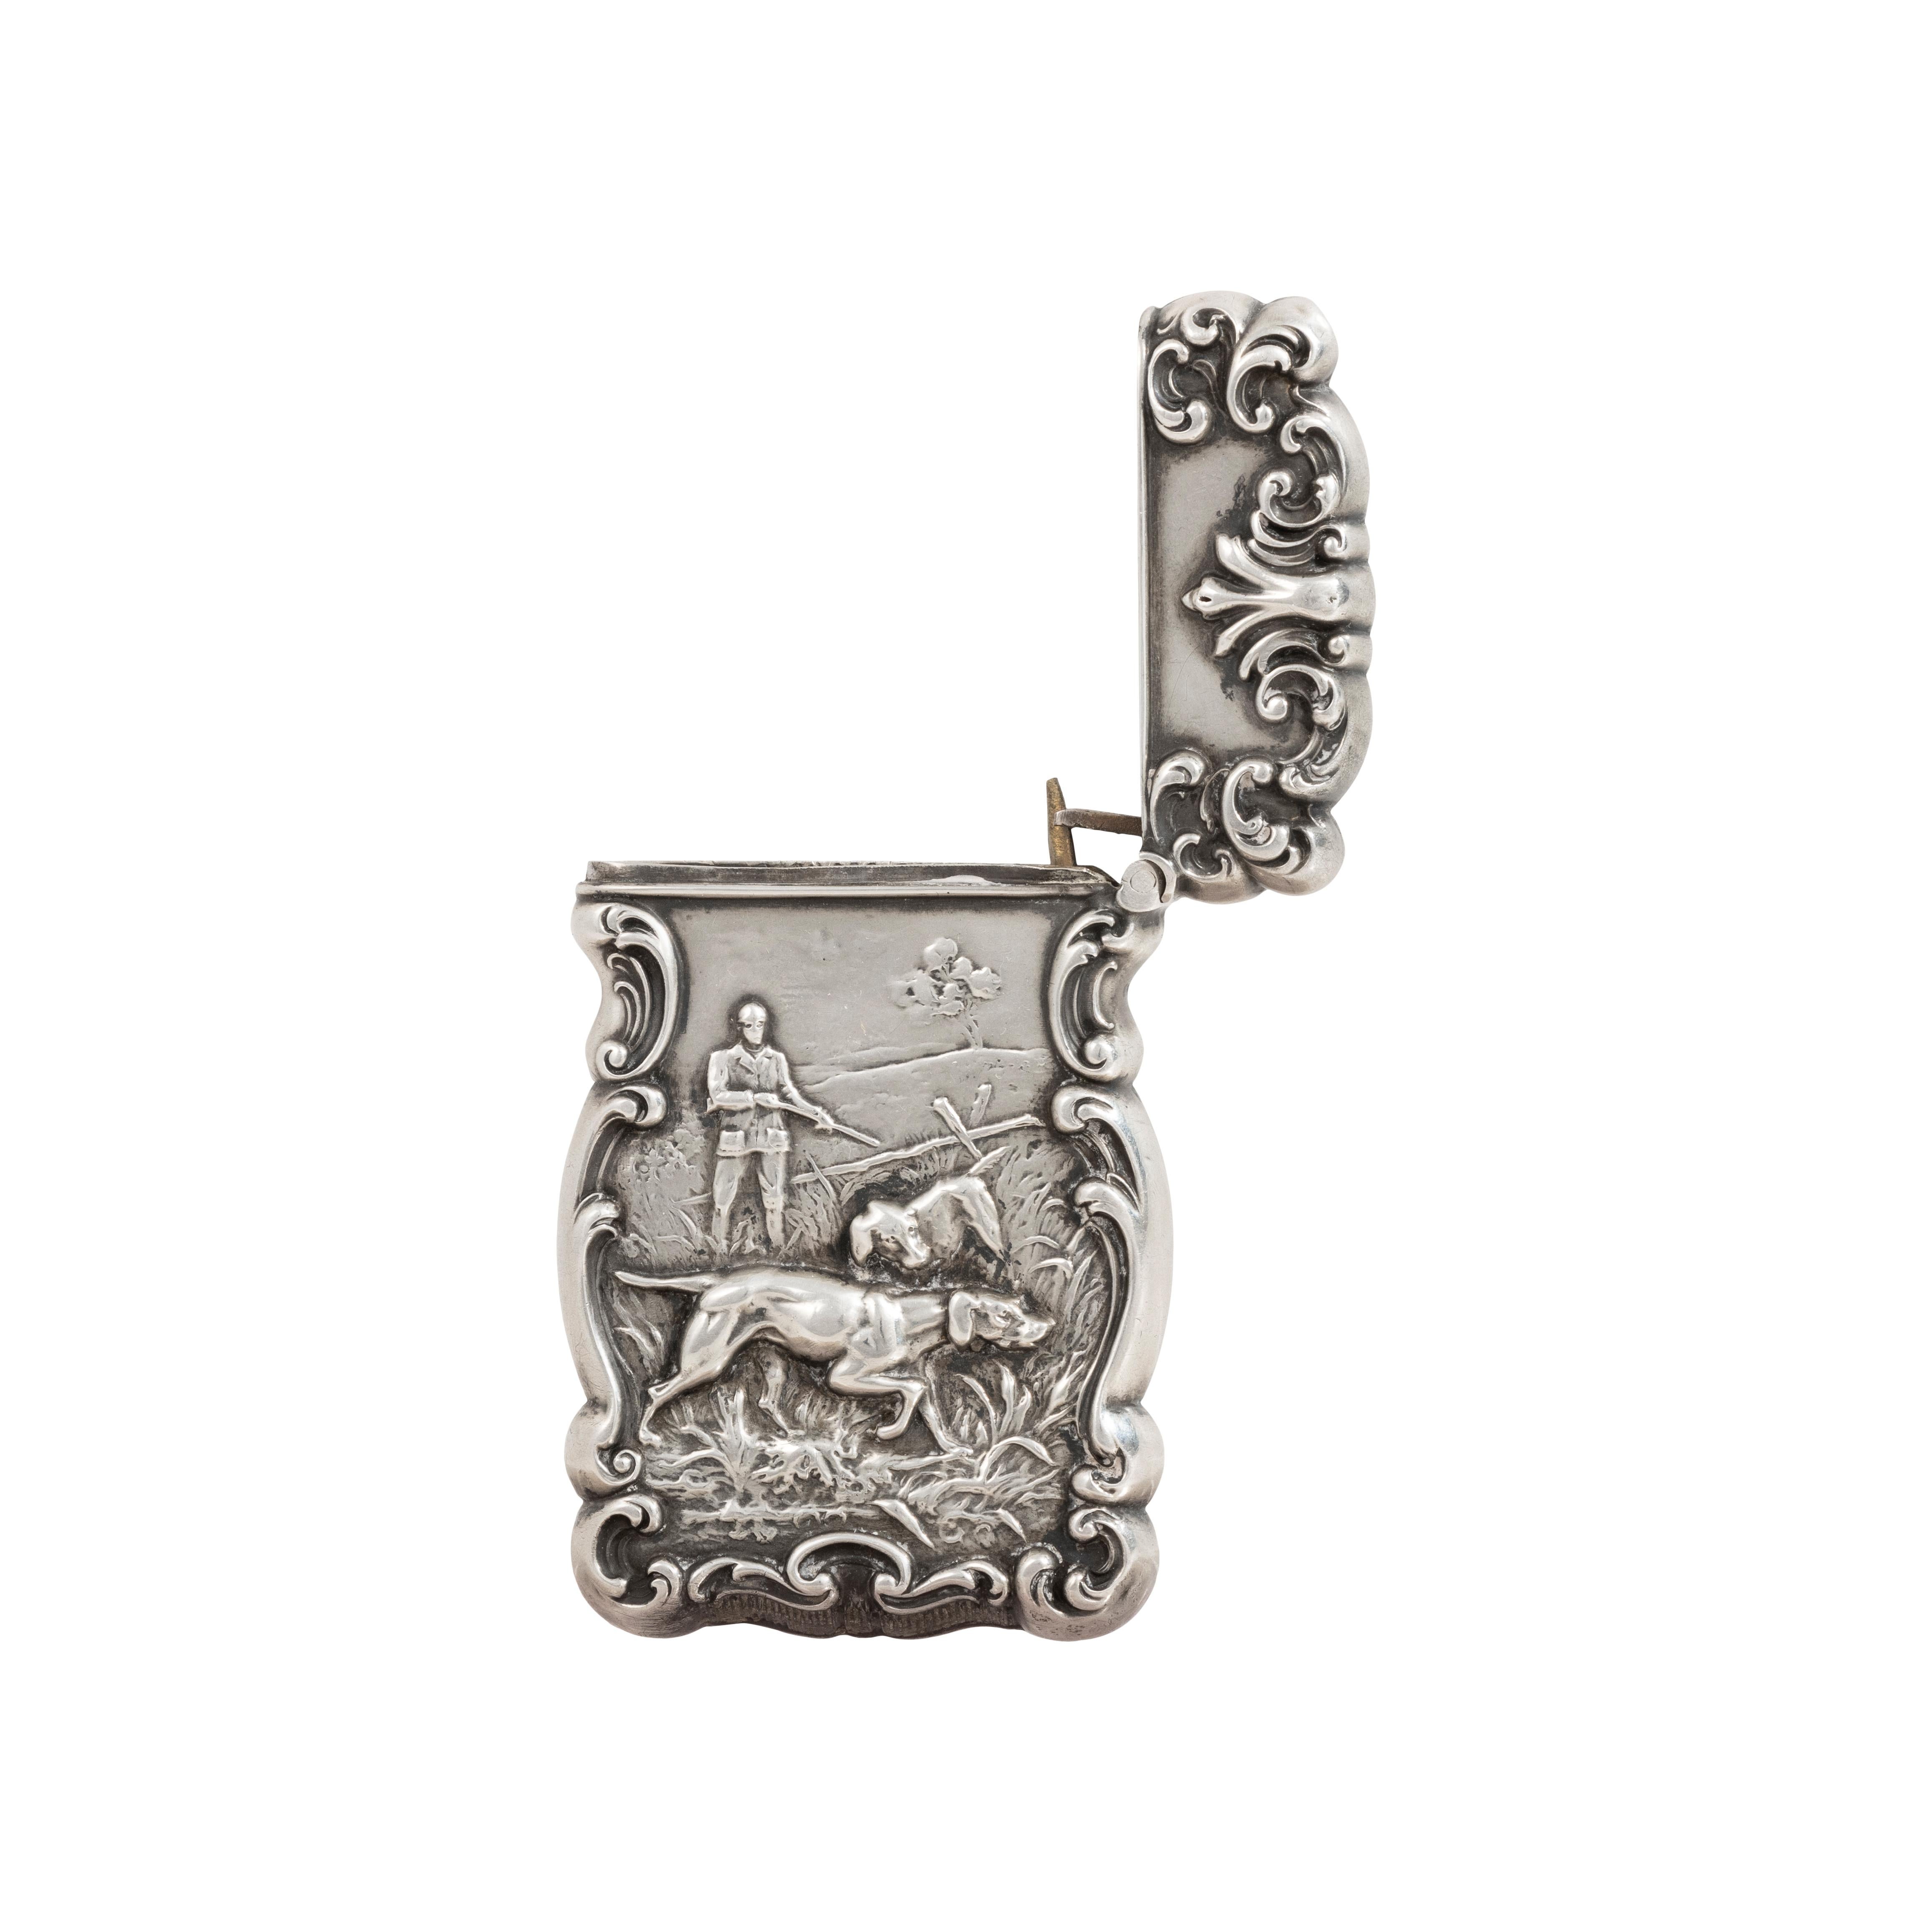 Sterling silver sporting match safe with etching. Two hunters with a pointer on point. In the early 1900s smoking could now move outdoors and become part of the outdoor sporting life. The match safe is decorated with a sporting theme popular with